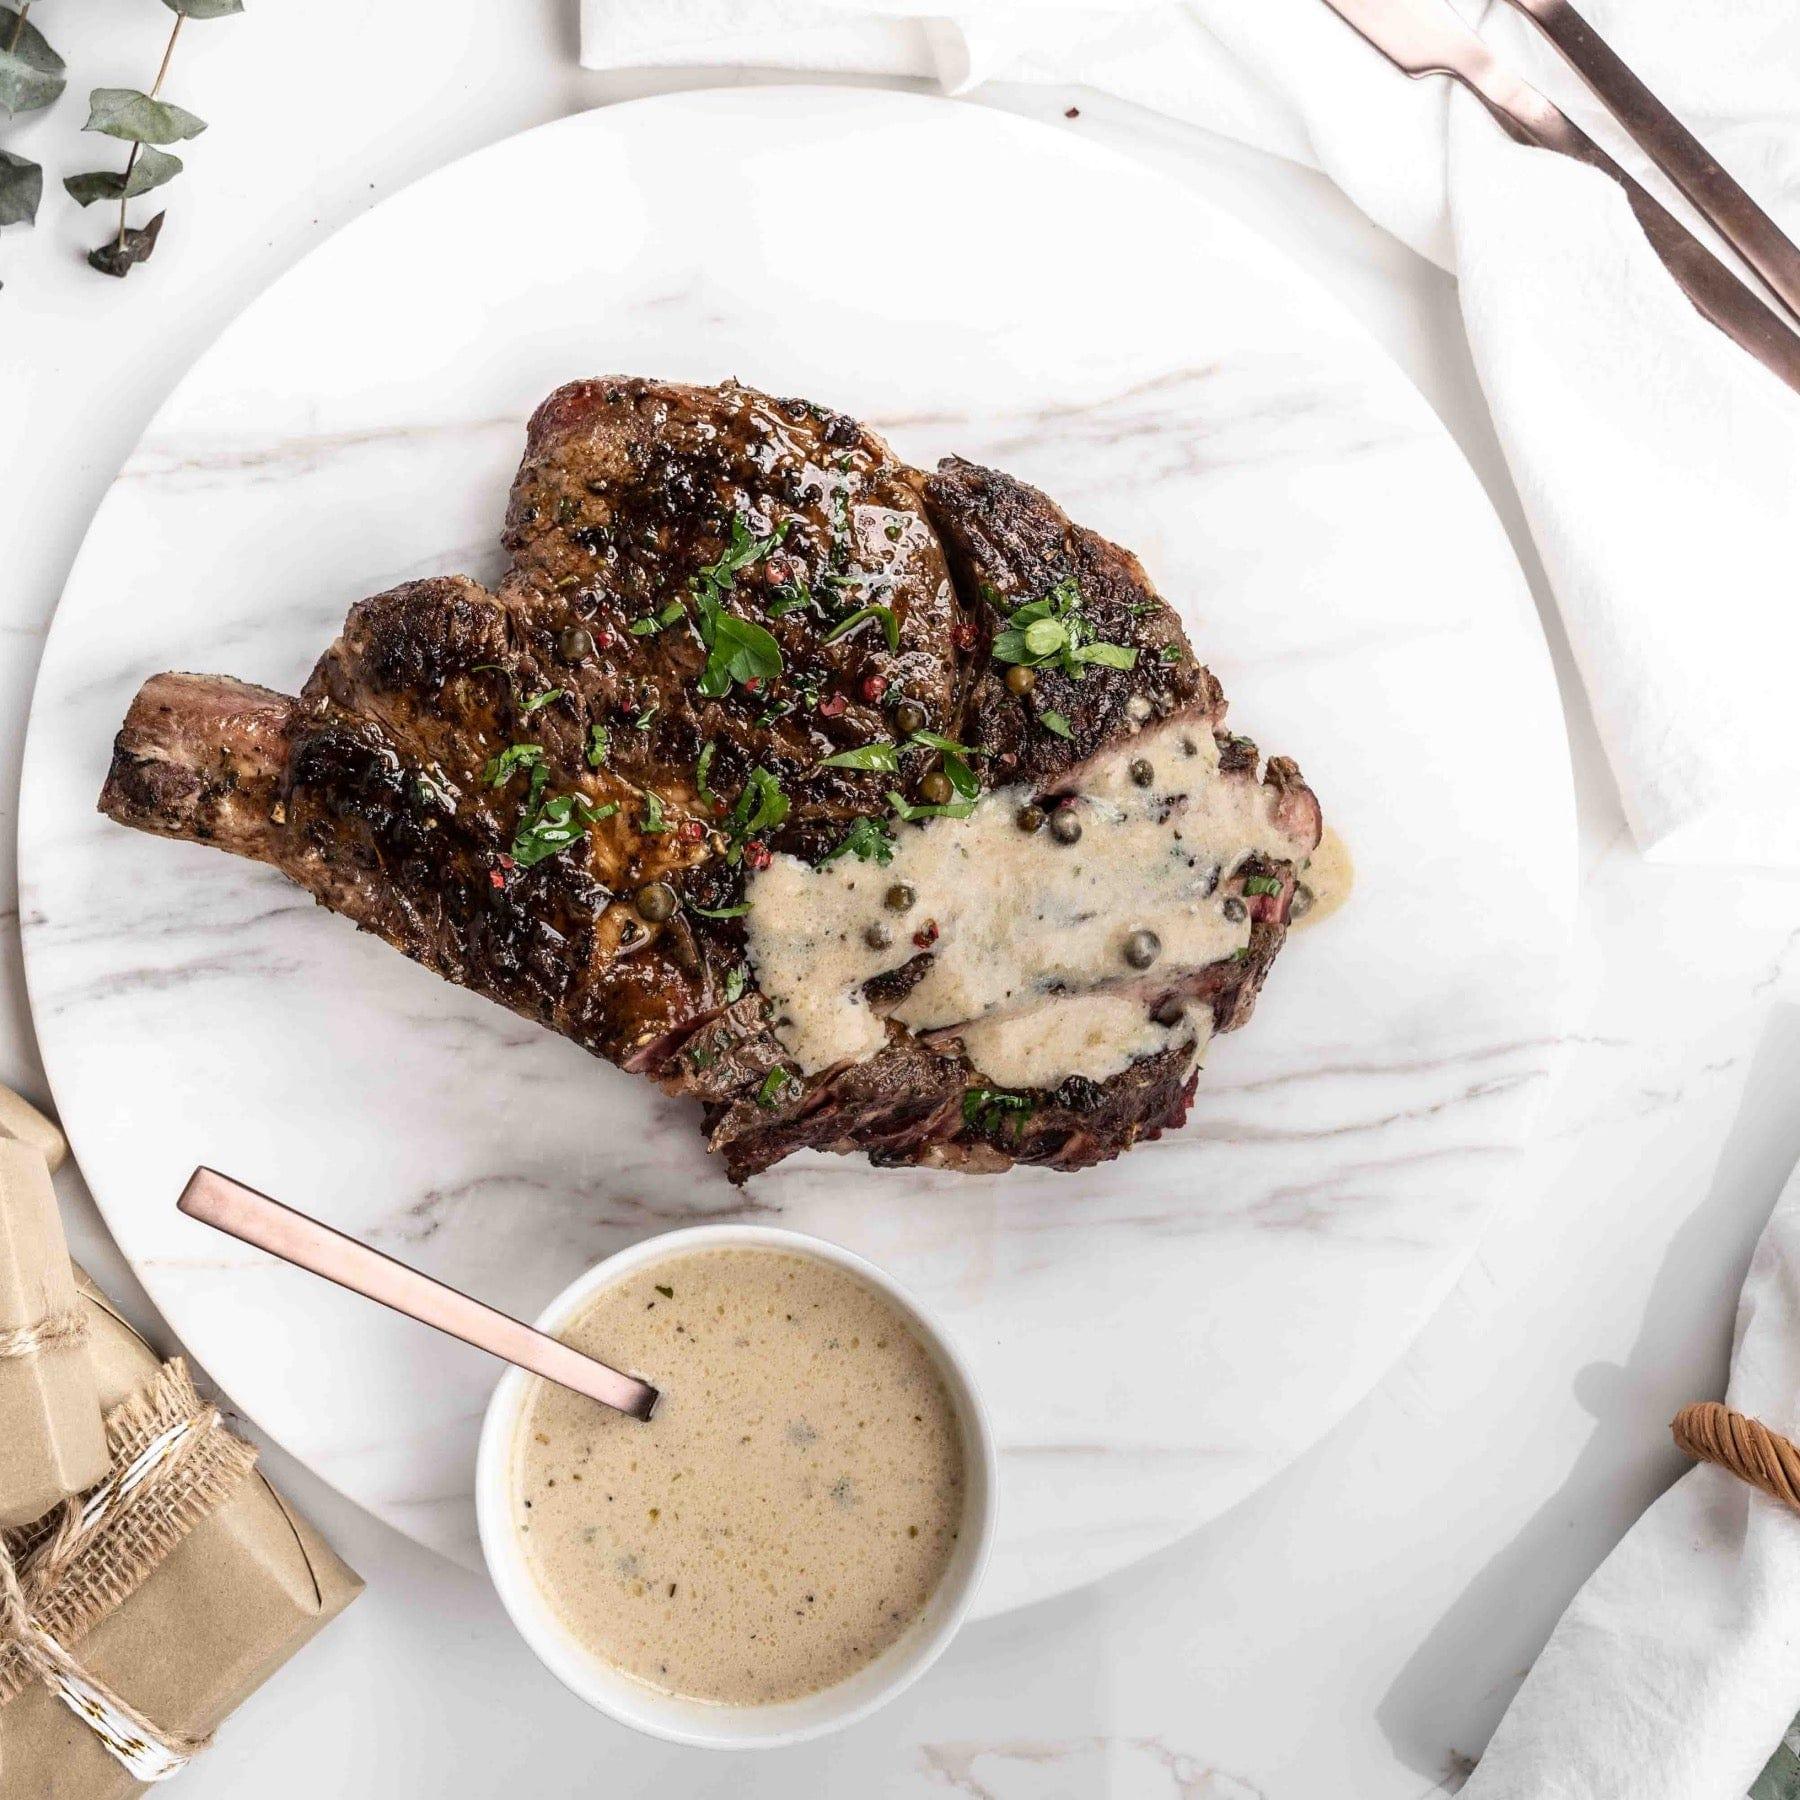 Ready to eat Meal 600g Premium Riverine Rib Eye with Creamy Pepper Sauce